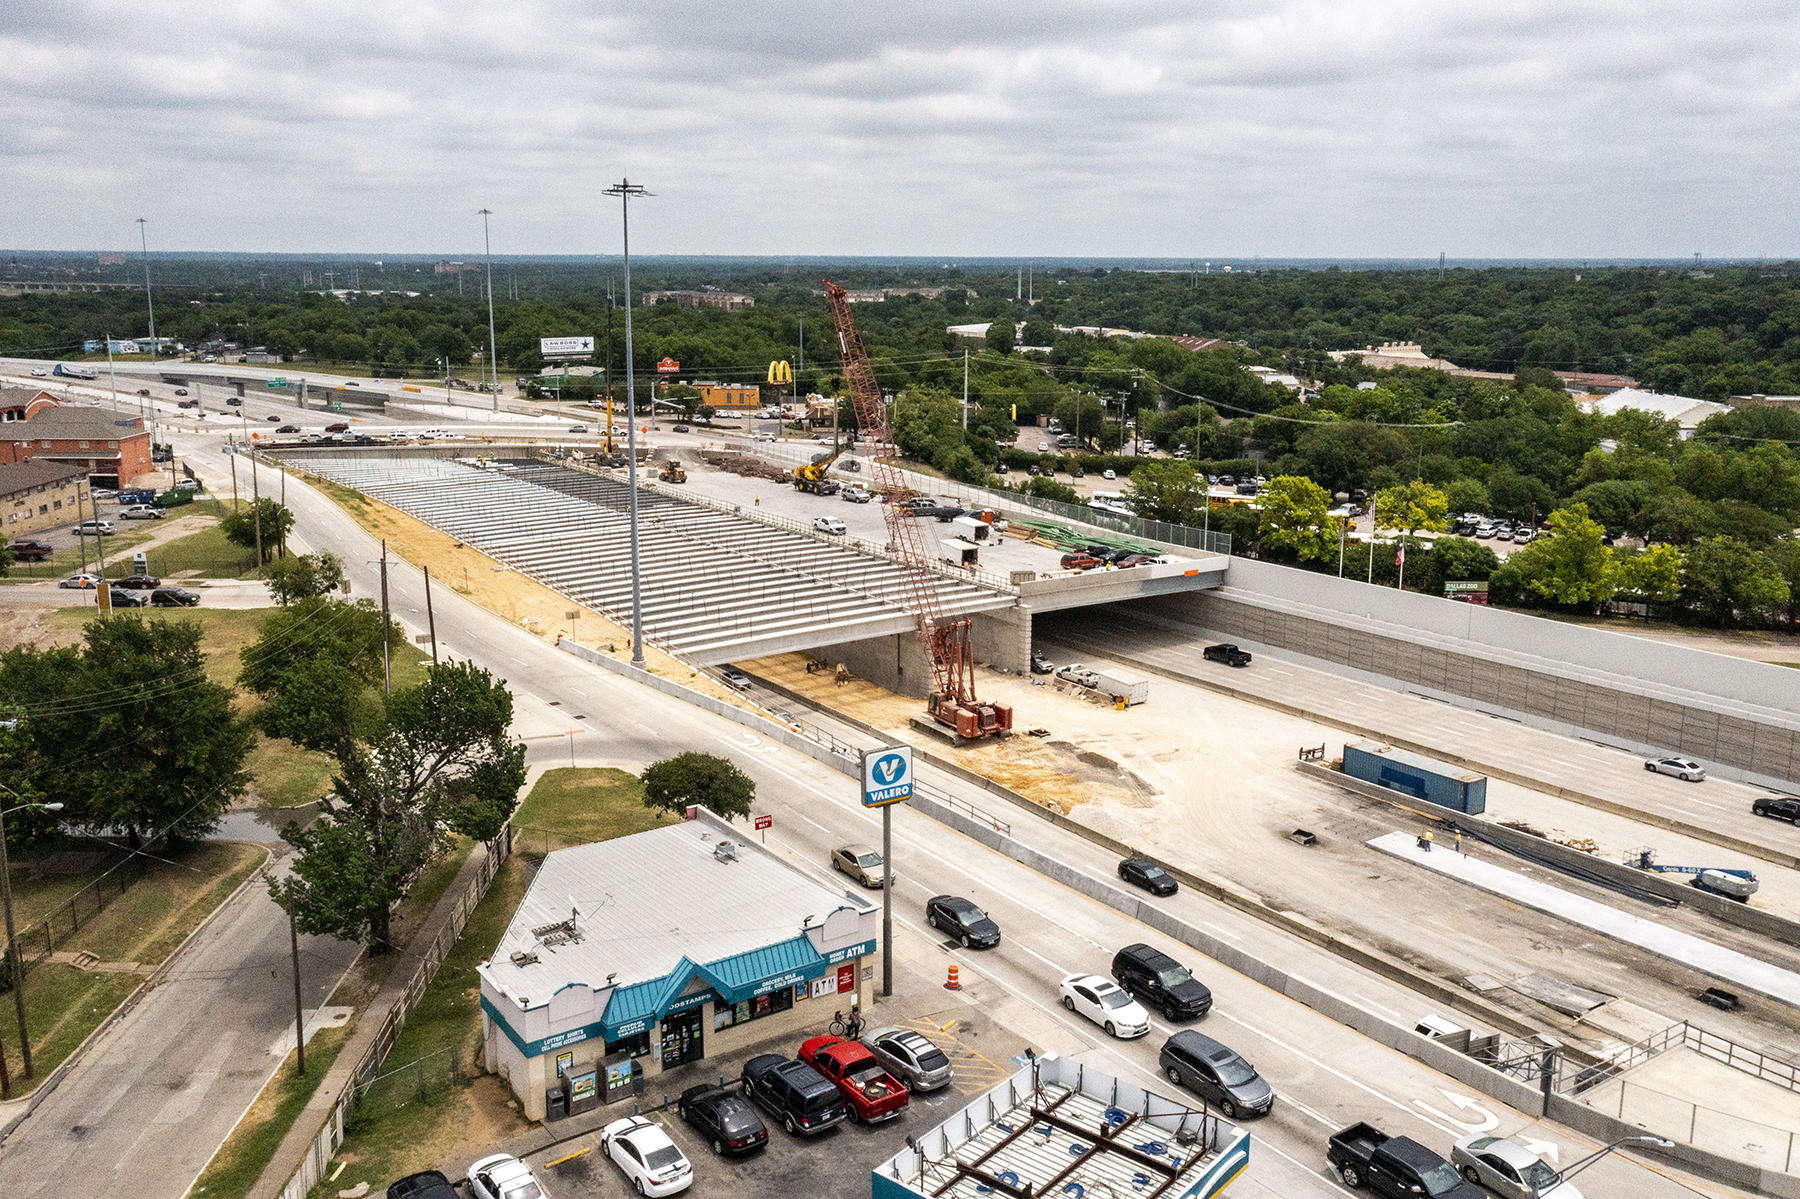 Construction on the Interstate 35 deck. (Image courtesy of David Lloyd)